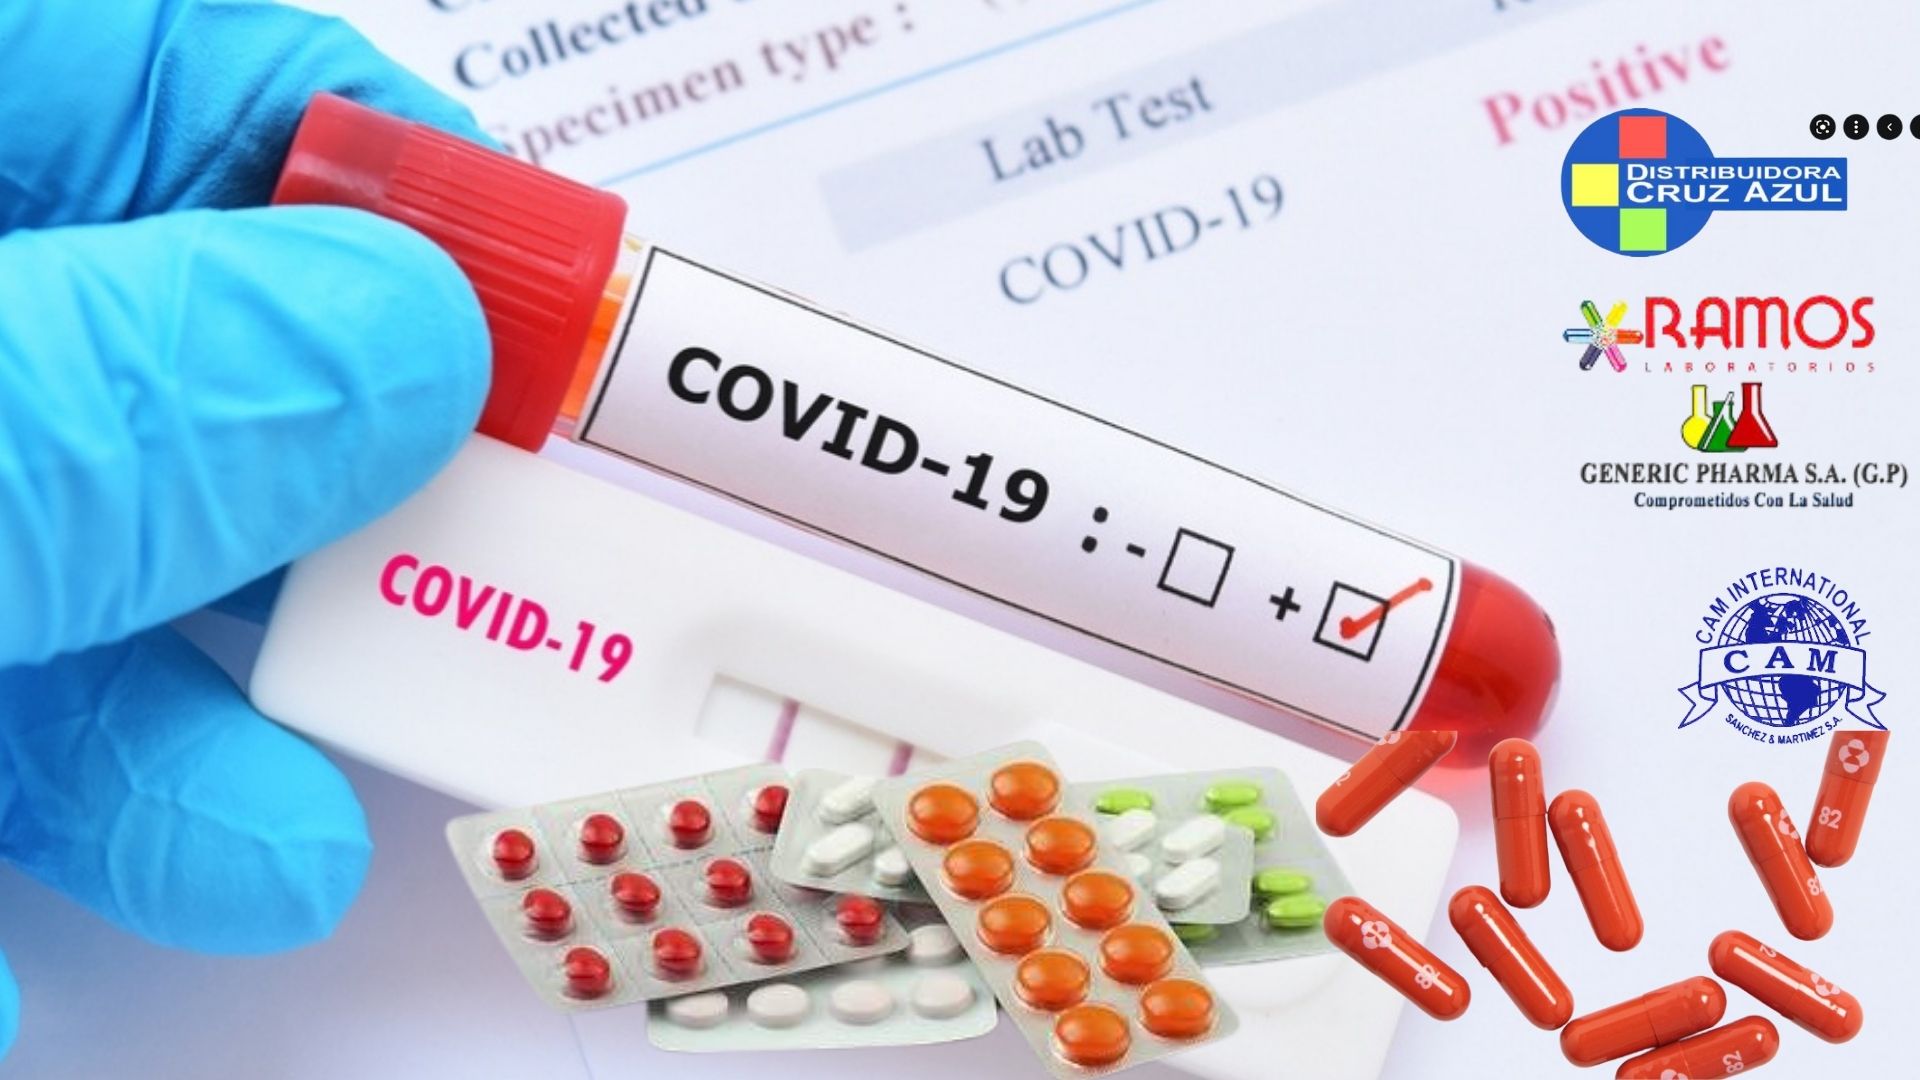 Nicaragua exceeds 20,000 confirmed cases of COVID-19